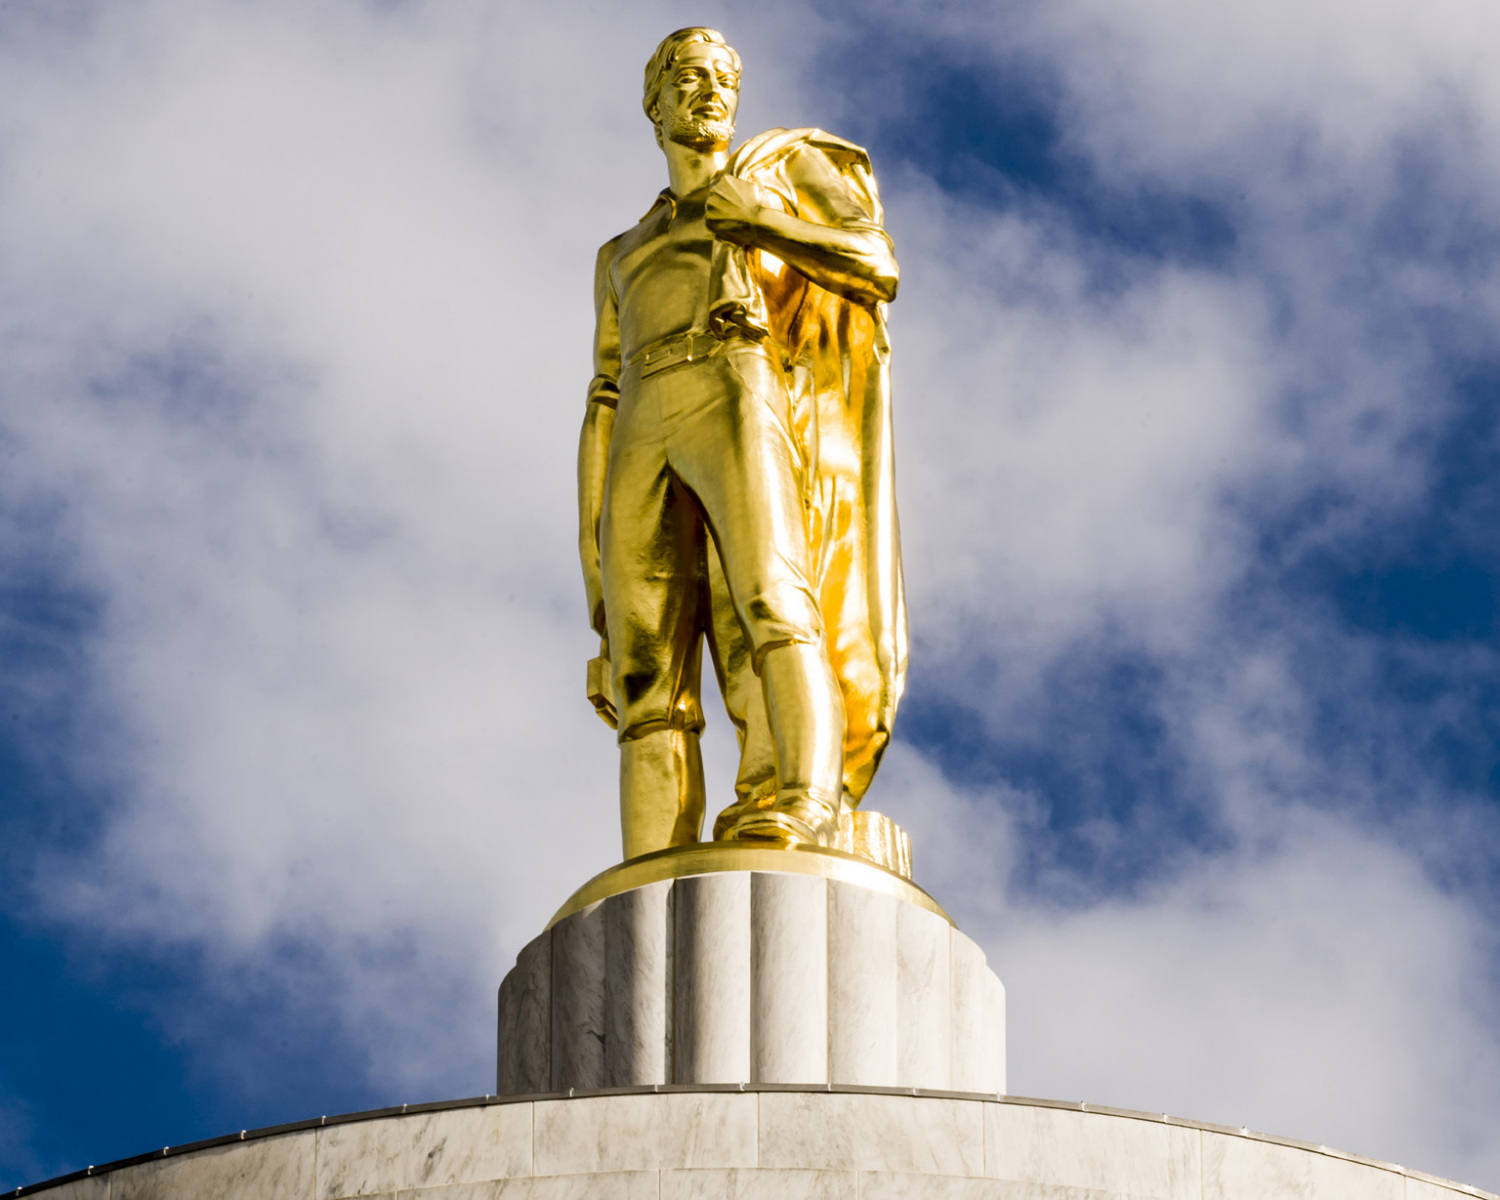 An image of the Oregon State Capitol cupola.  Atop the cupola is Oregon Pioneer, representing the spirit of Oregon's early settlers.  Sculpted by Ulrie Ellerhusen, the statue, finished in gold leaf, stands 23 feet tall.  The marble Art Deco structure, located in Salem, was designed by Francis Keally of the New York firm of Trowbridge And Livingston.  The Oregon State Capitol, completed in 1938, is listed on the National Register of Historic Places.  This image © Capitolshots Photography/TwoFiftyFour Photos, LLC, ALL RIGHTS RESERVED.